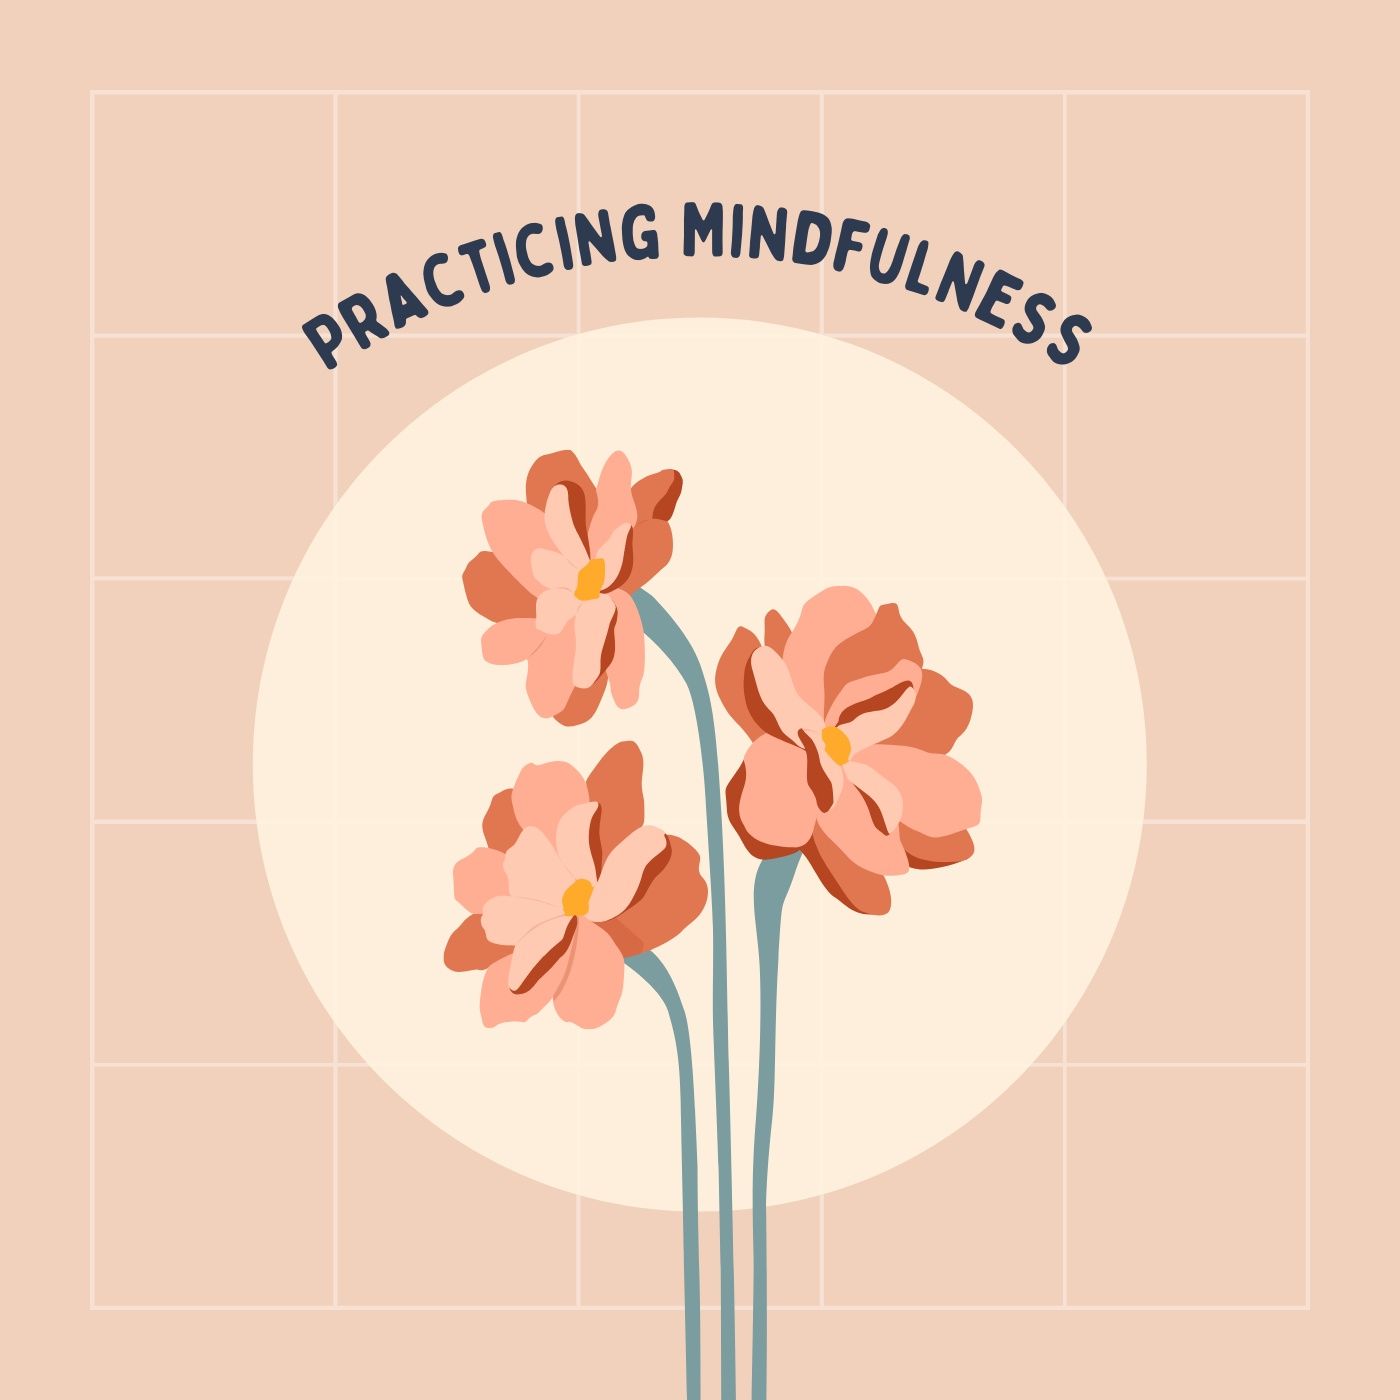 Practicing Mindfulness